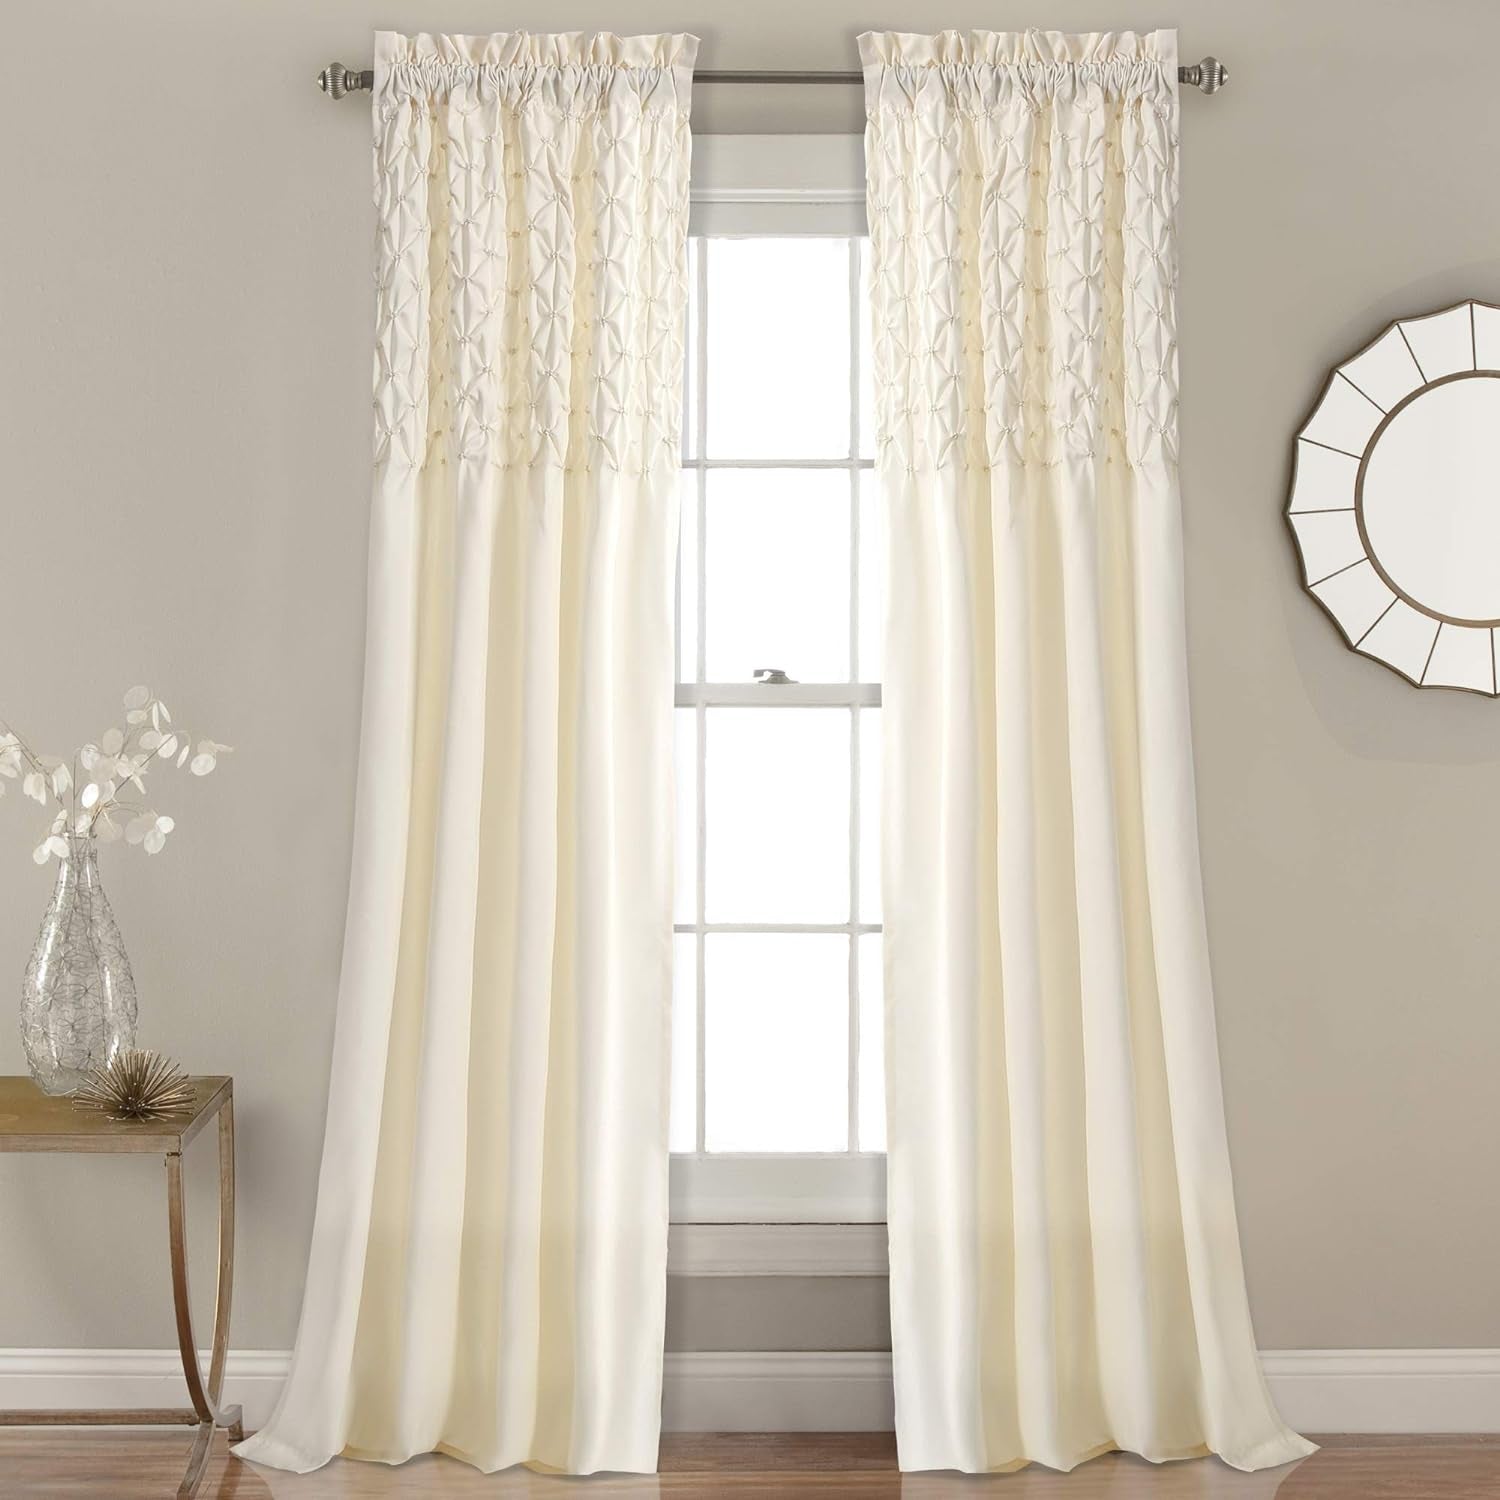 Lush Decor Bayview Curtains-Pintuck Textured Semi Sheer Window Panel Drapes Set for Living, Dining, Bedroom (Pair), 54" W X 84" L, White  Triangle Home Fashions Ivory 54"W X 84"L 